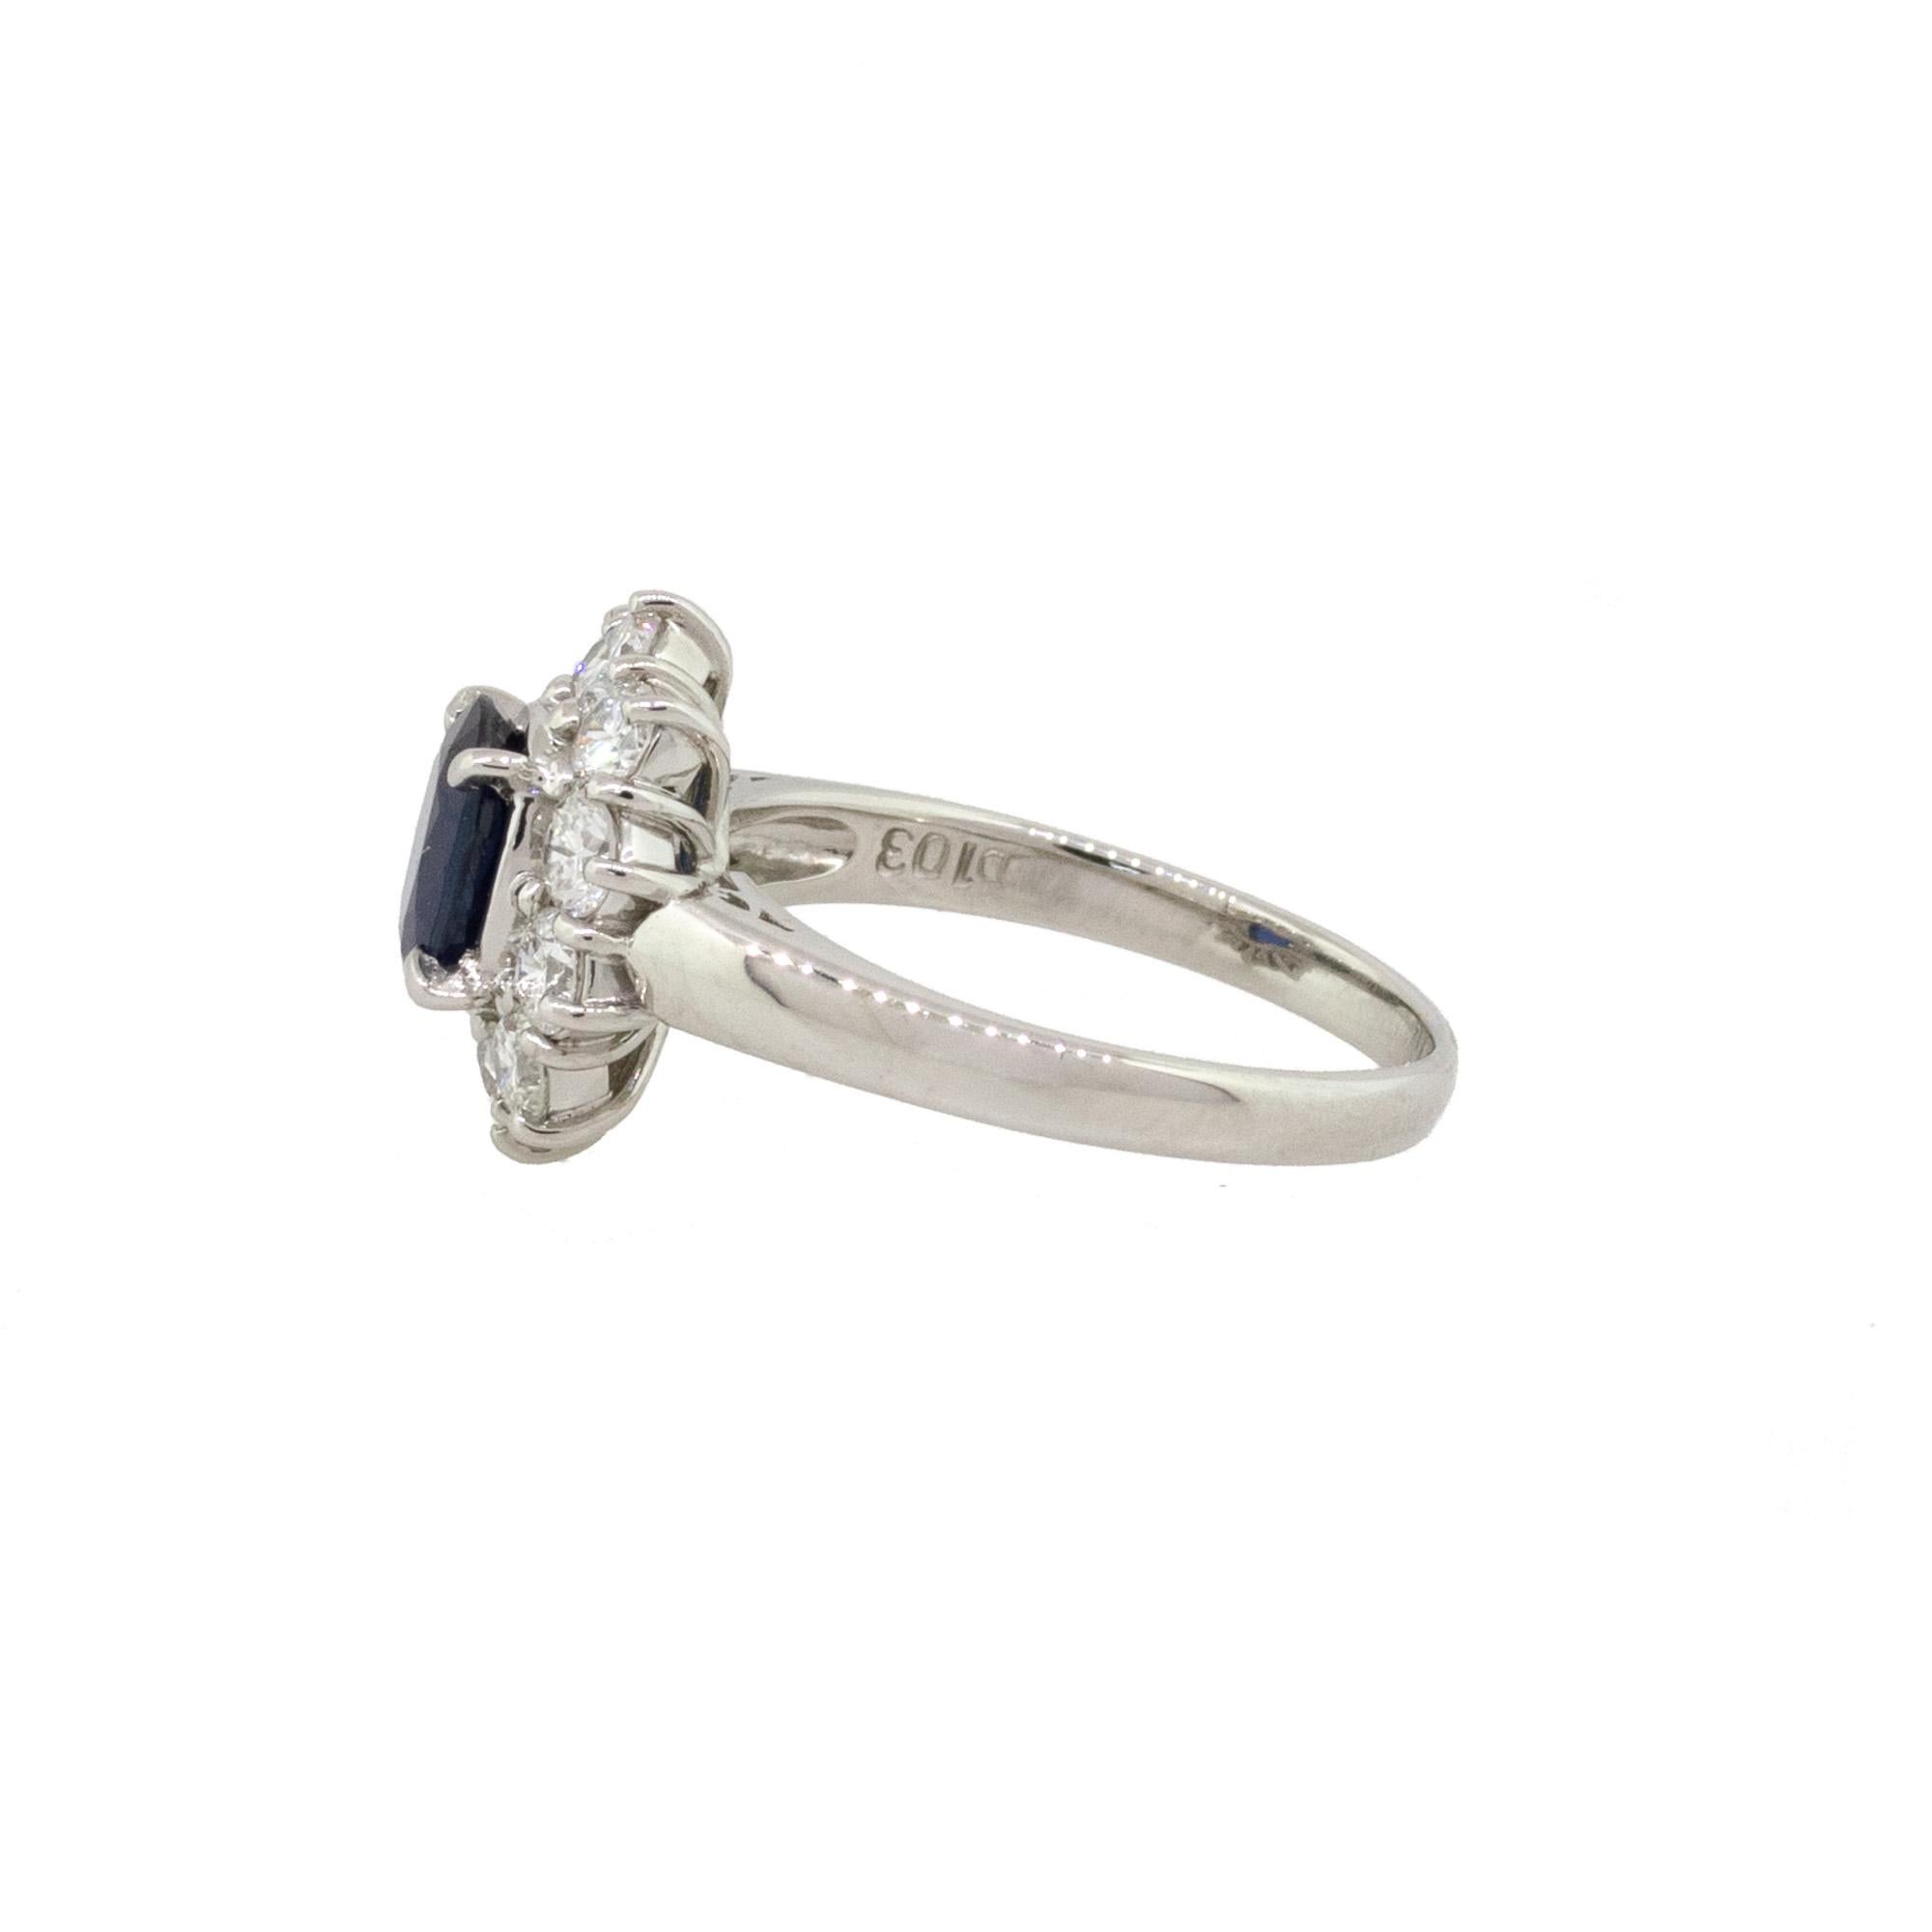 Material: Platinum
Center Gemstone Details: 1.03ct Blue Sapphire (Heat treated)
Adjacent Diamond Details: Approx. 1.0ctw of round cut diamonds. Diamonds are G/H in color and VS in clarity.
Ring Size: 6.5
Ring Measurements: 0.98